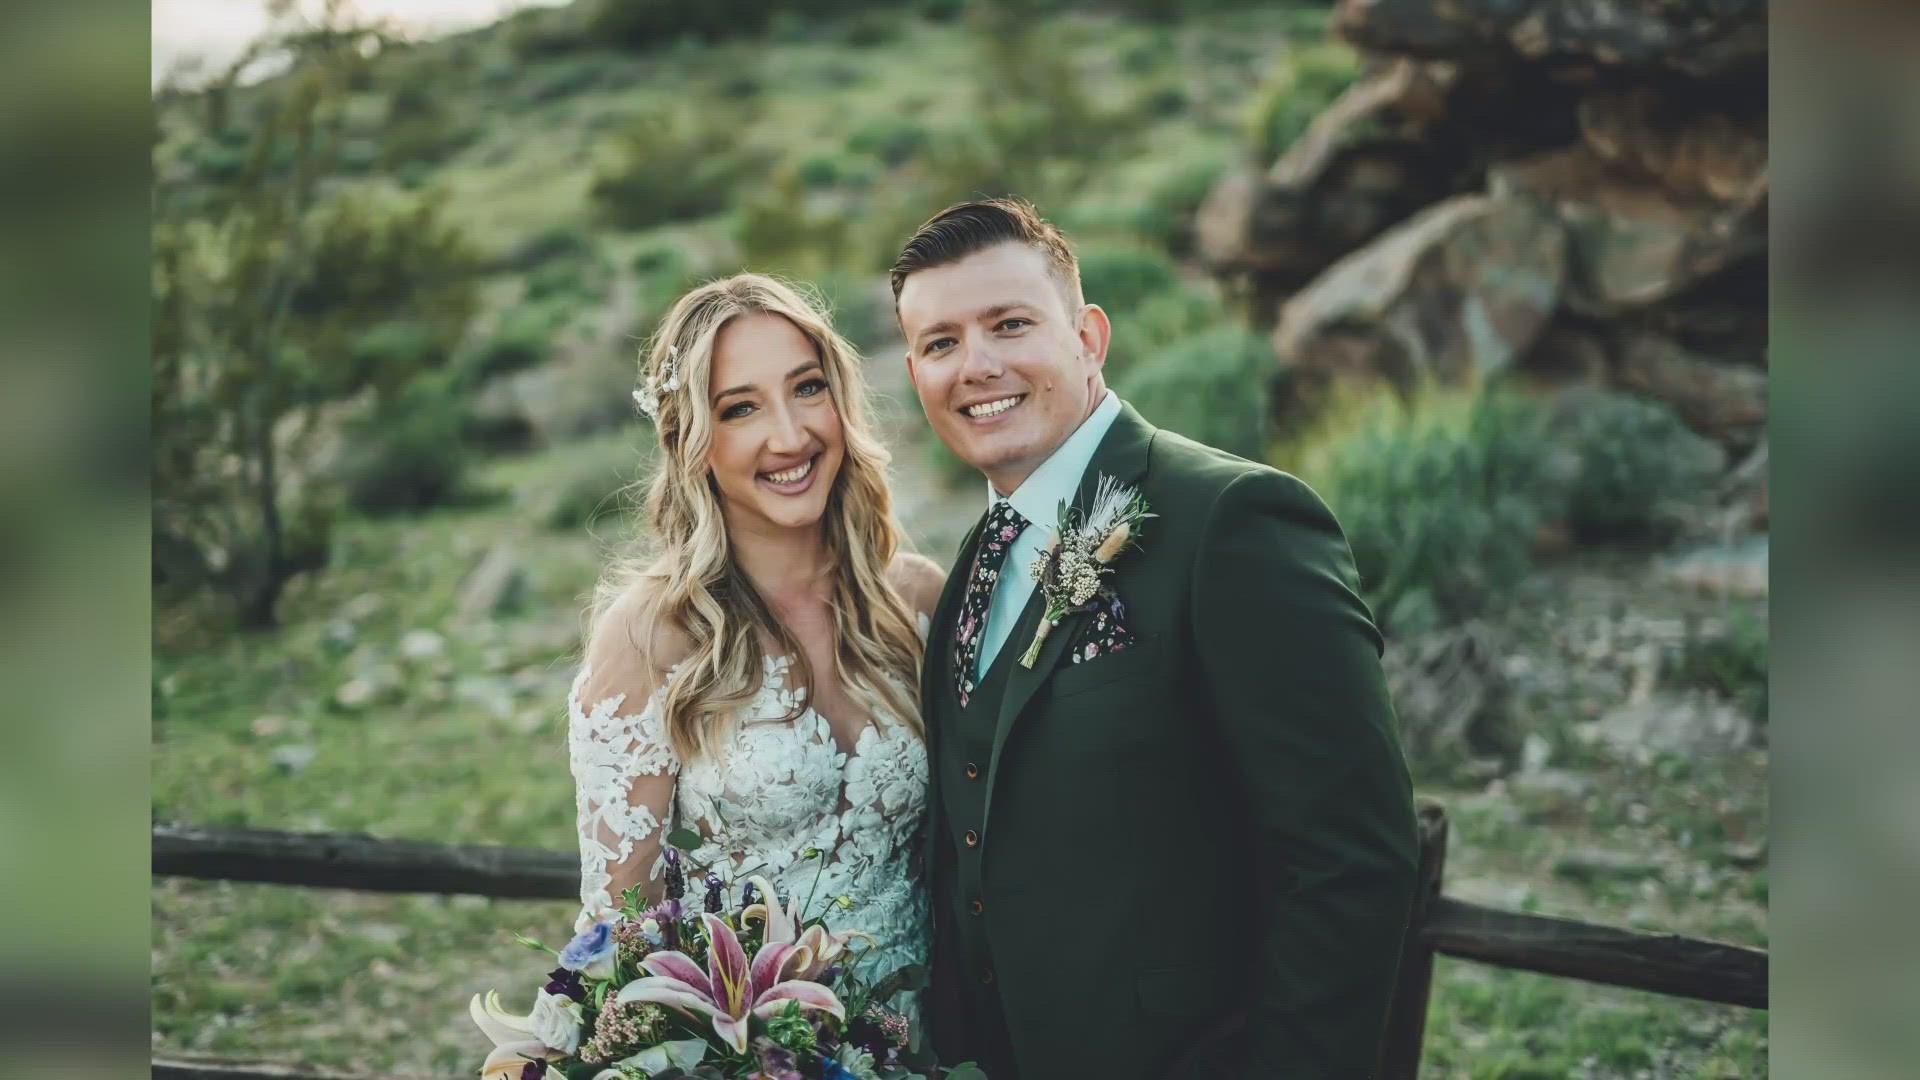 Austin Johnson and Kelley Delano's wedding plans were put on pause following record snowfall in Sedona earlier this March. That wasn't the end of their story.